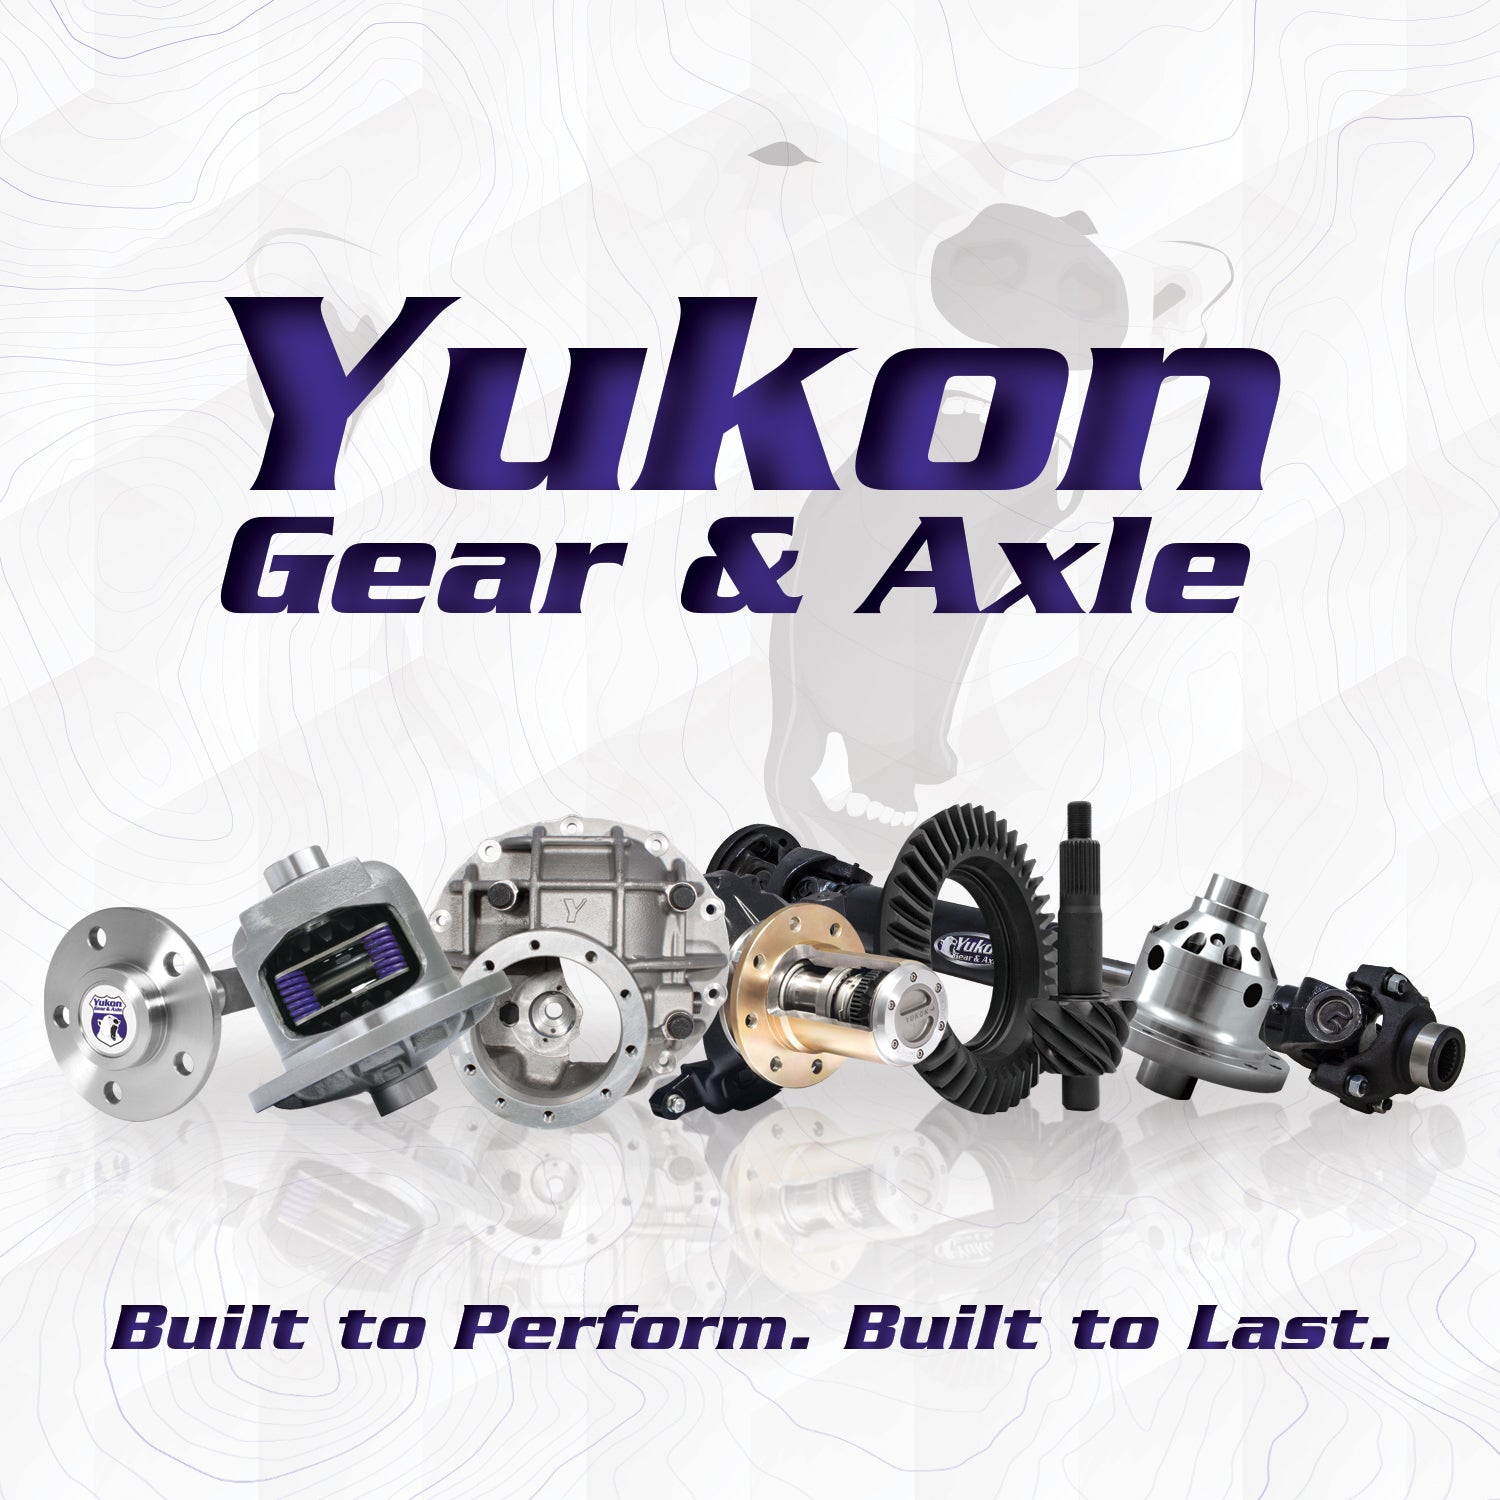 Yukon Gear 02-05 Dodge Ram 1500 (4WD) Axle Differential Bearing and Seal Kit - Front BKC8.0-IFS-C